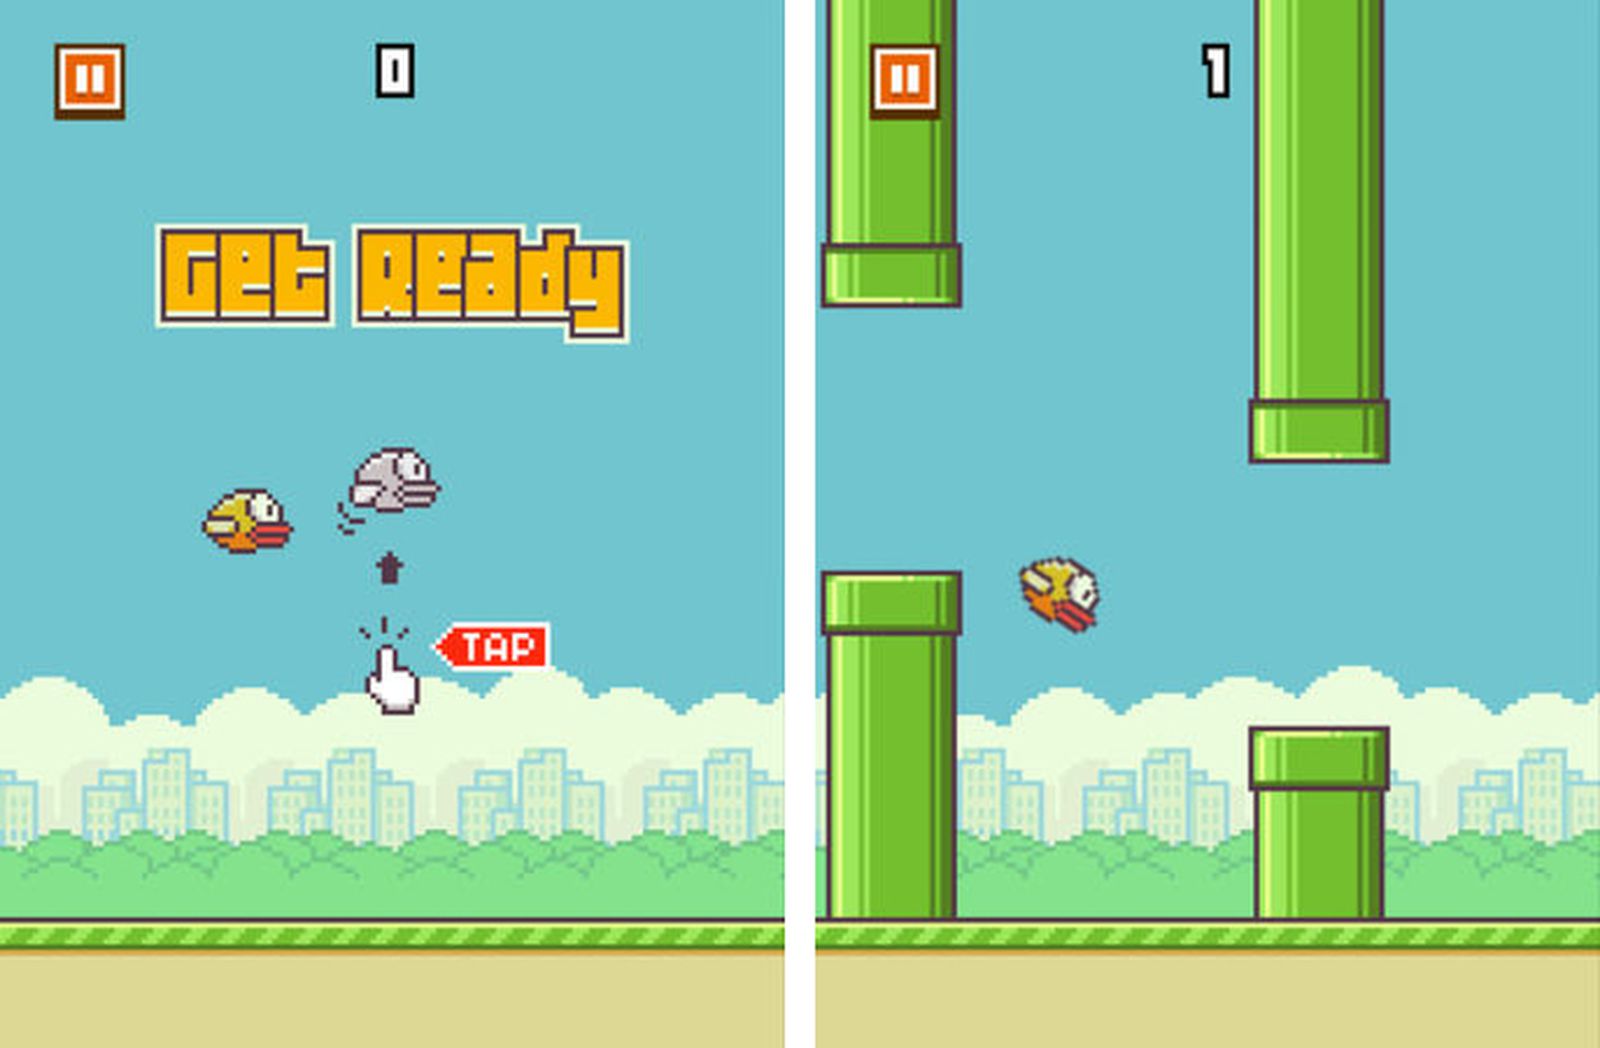 Flappy Bird is coming back to app store